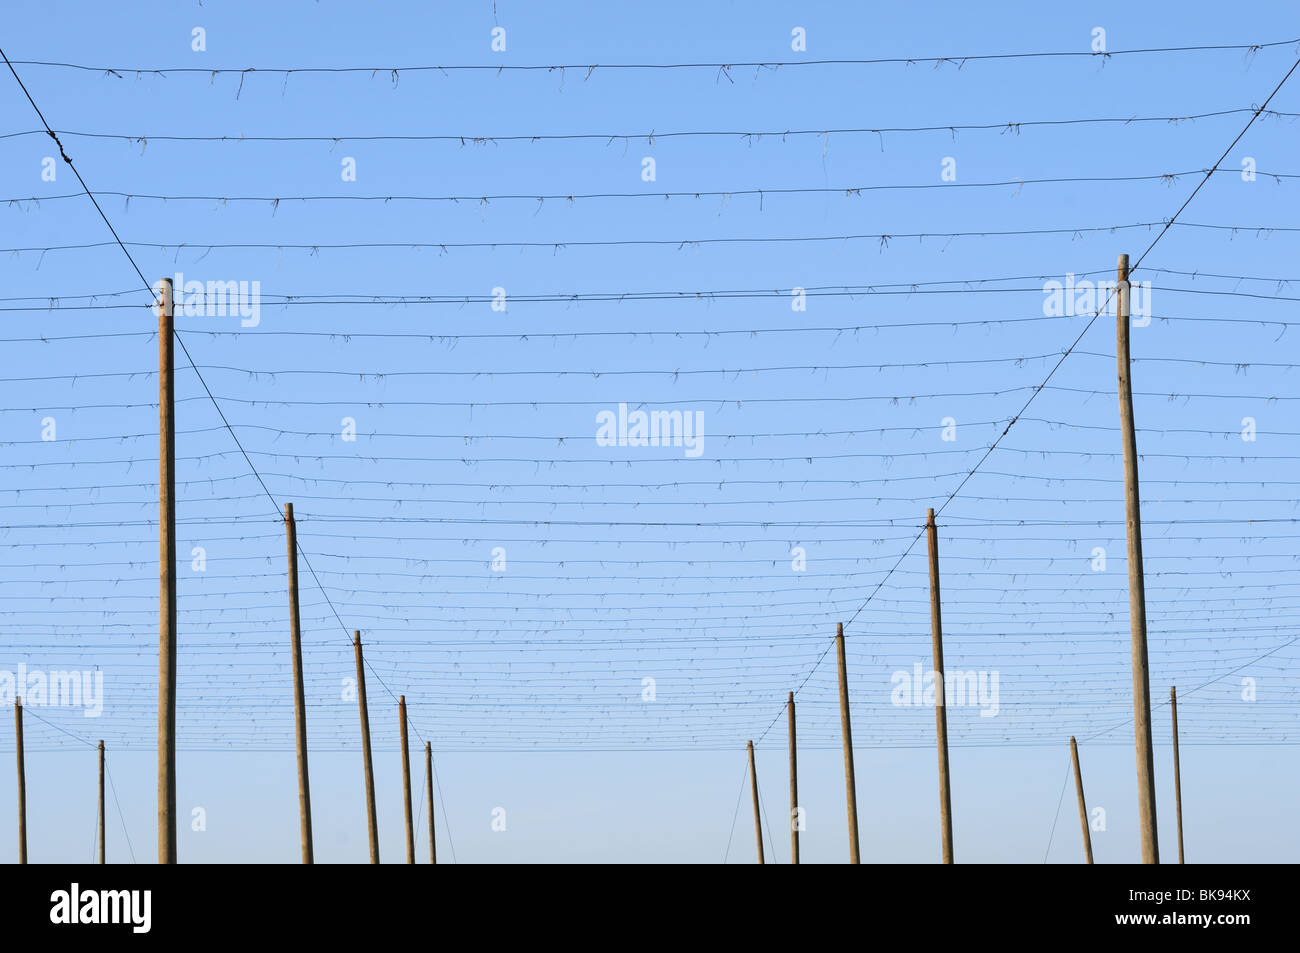 Superstructure with wires in a hop yard. Stock Photo